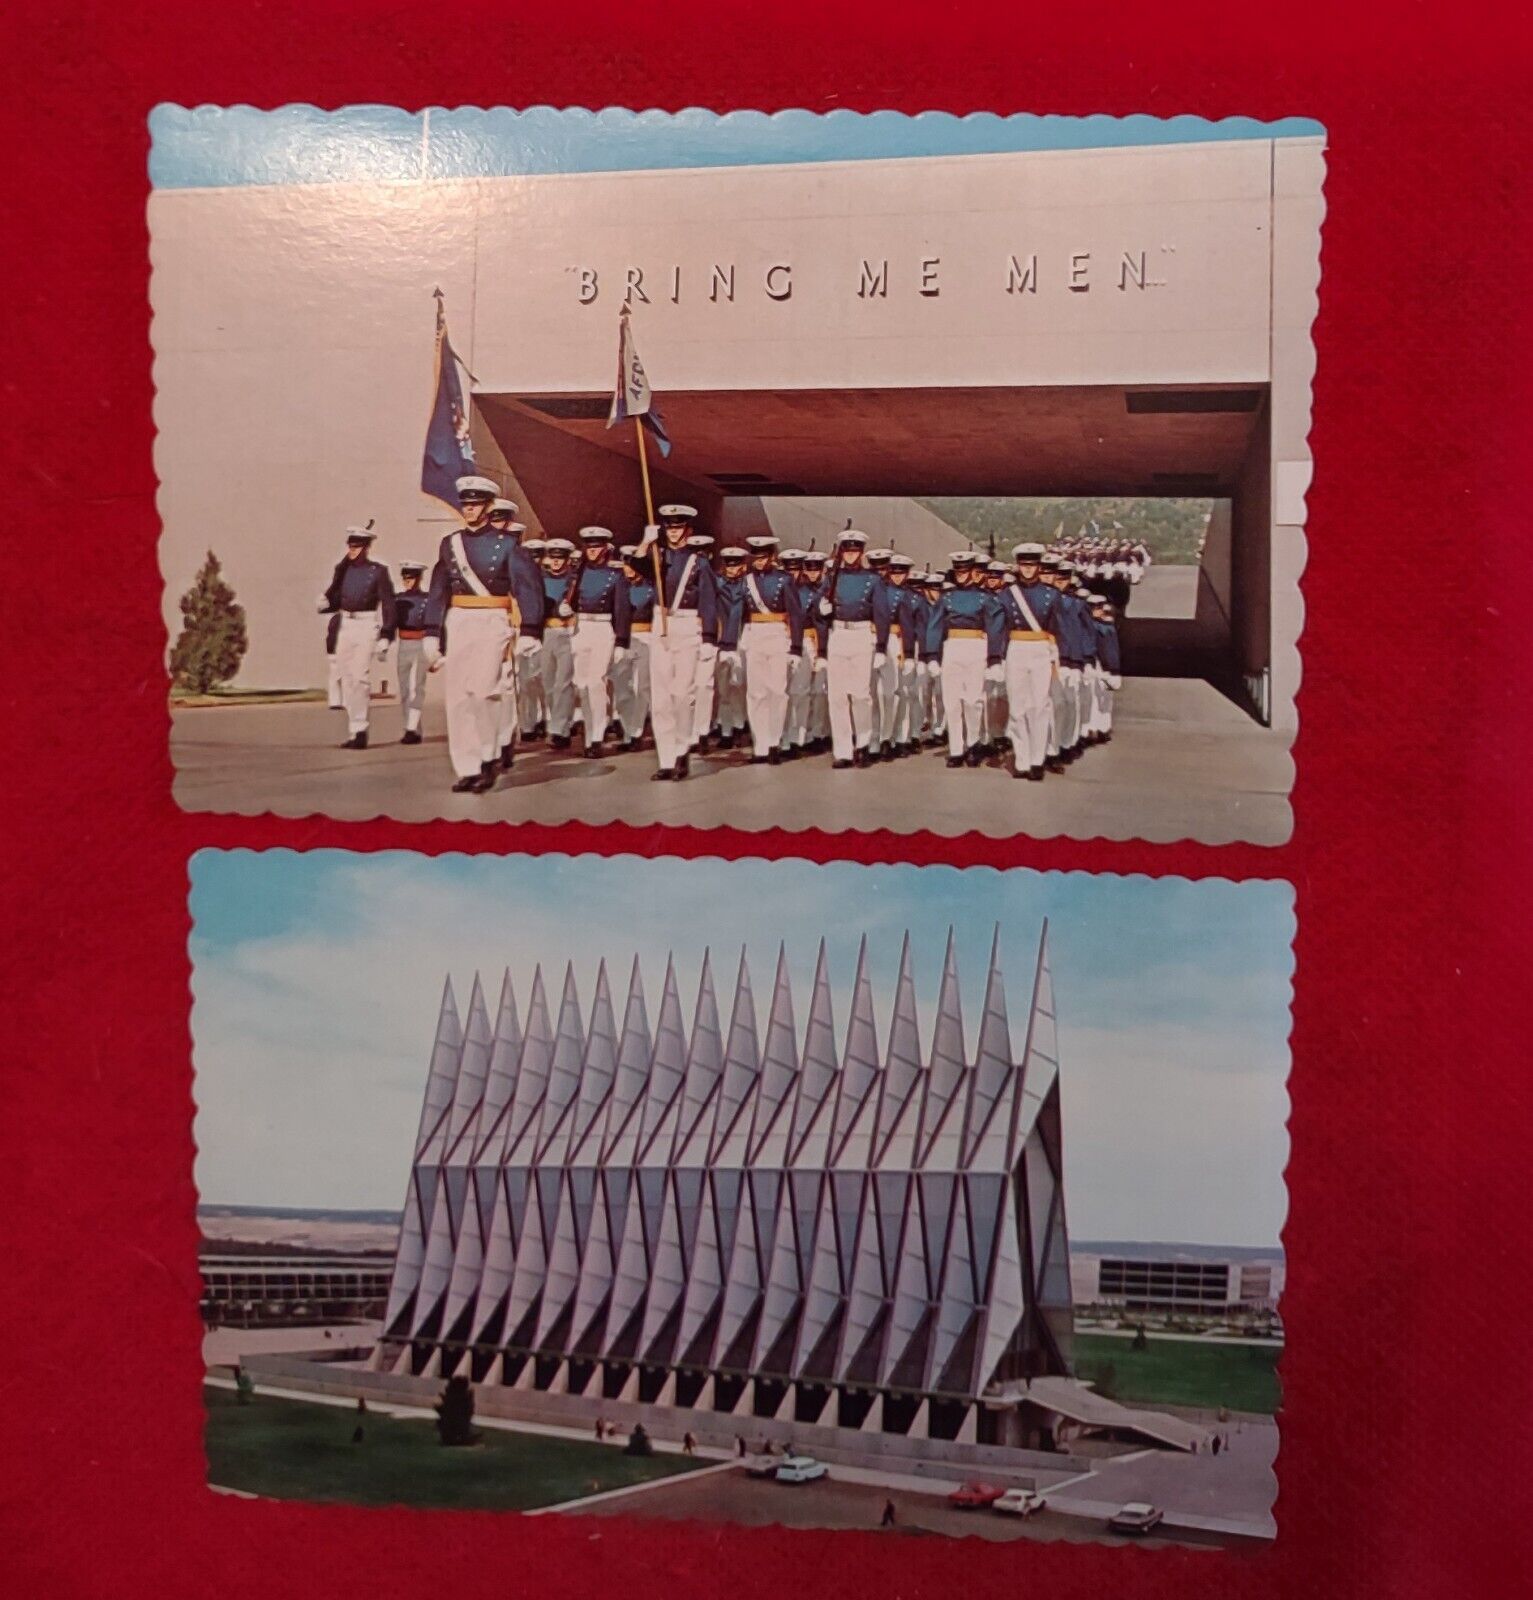 I.S. Air Force Academy Colorado Springs. Chapel and Cadet March Formation